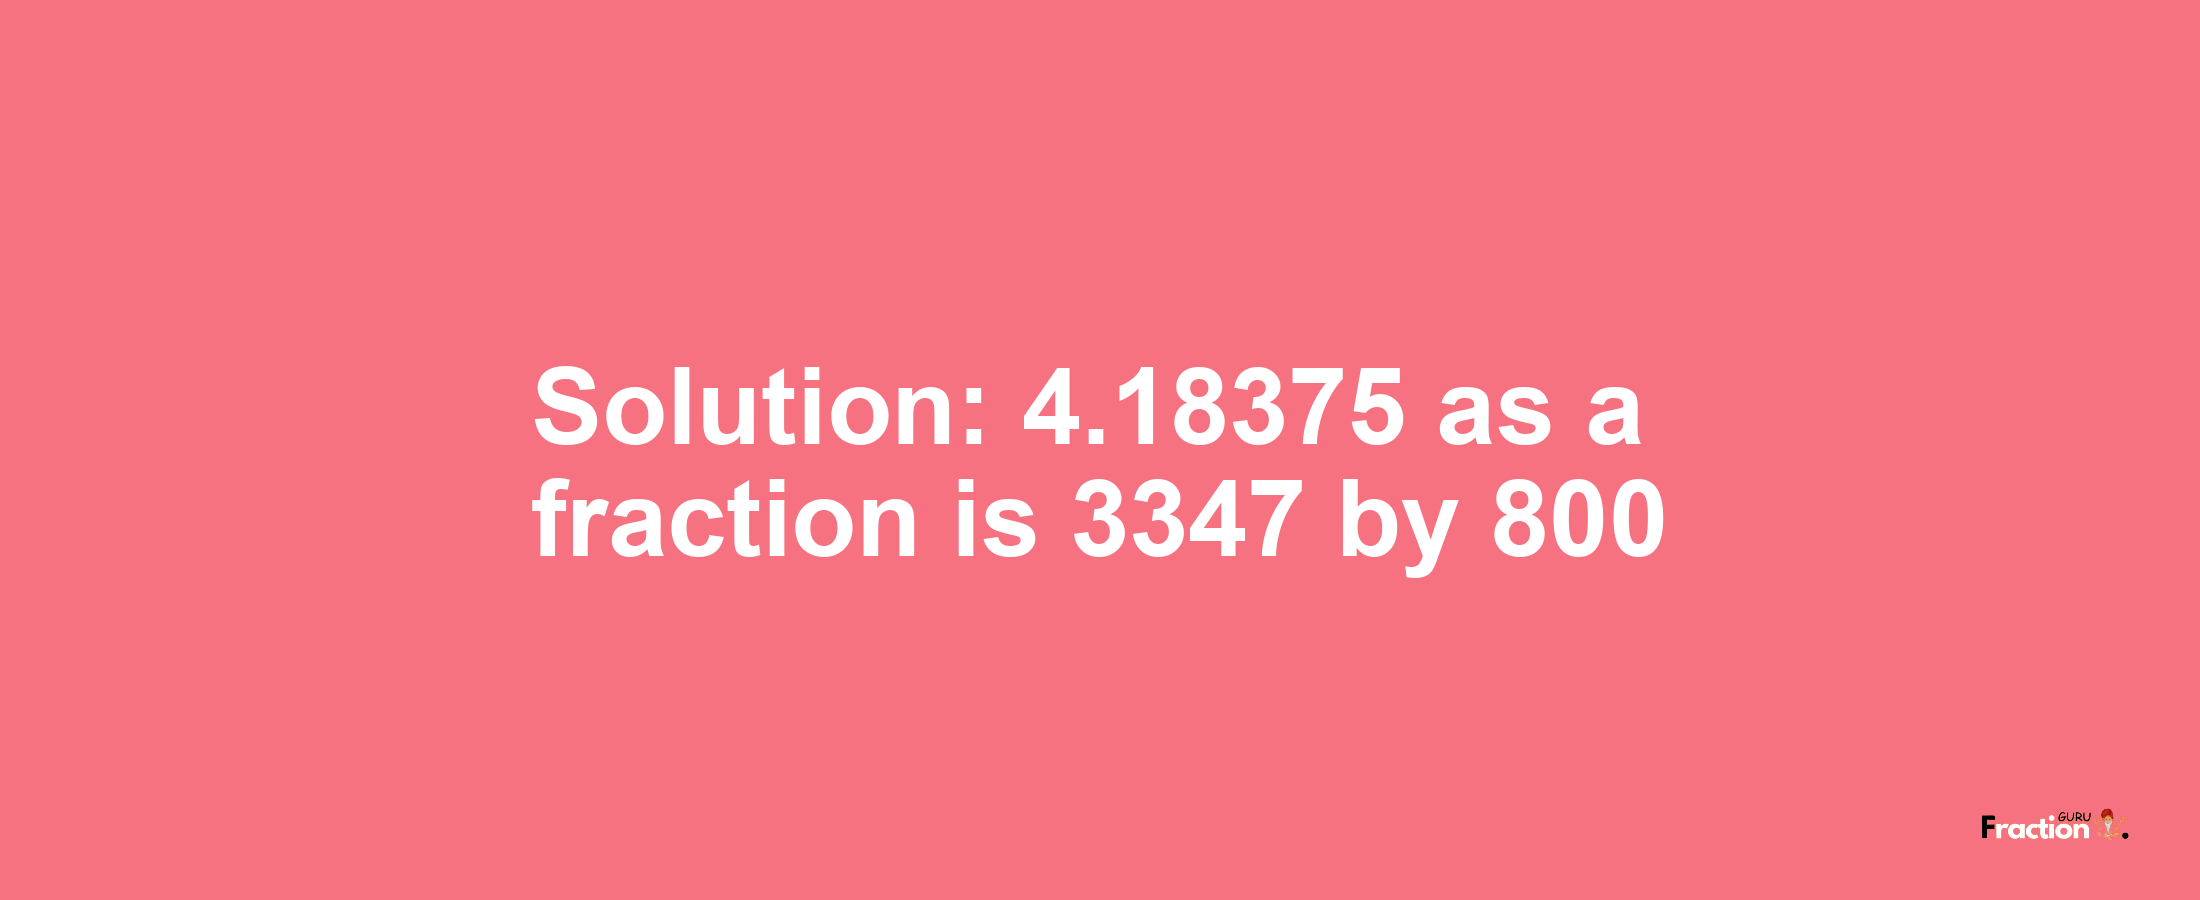 Solution:4.18375 as a fraction is 3347/800